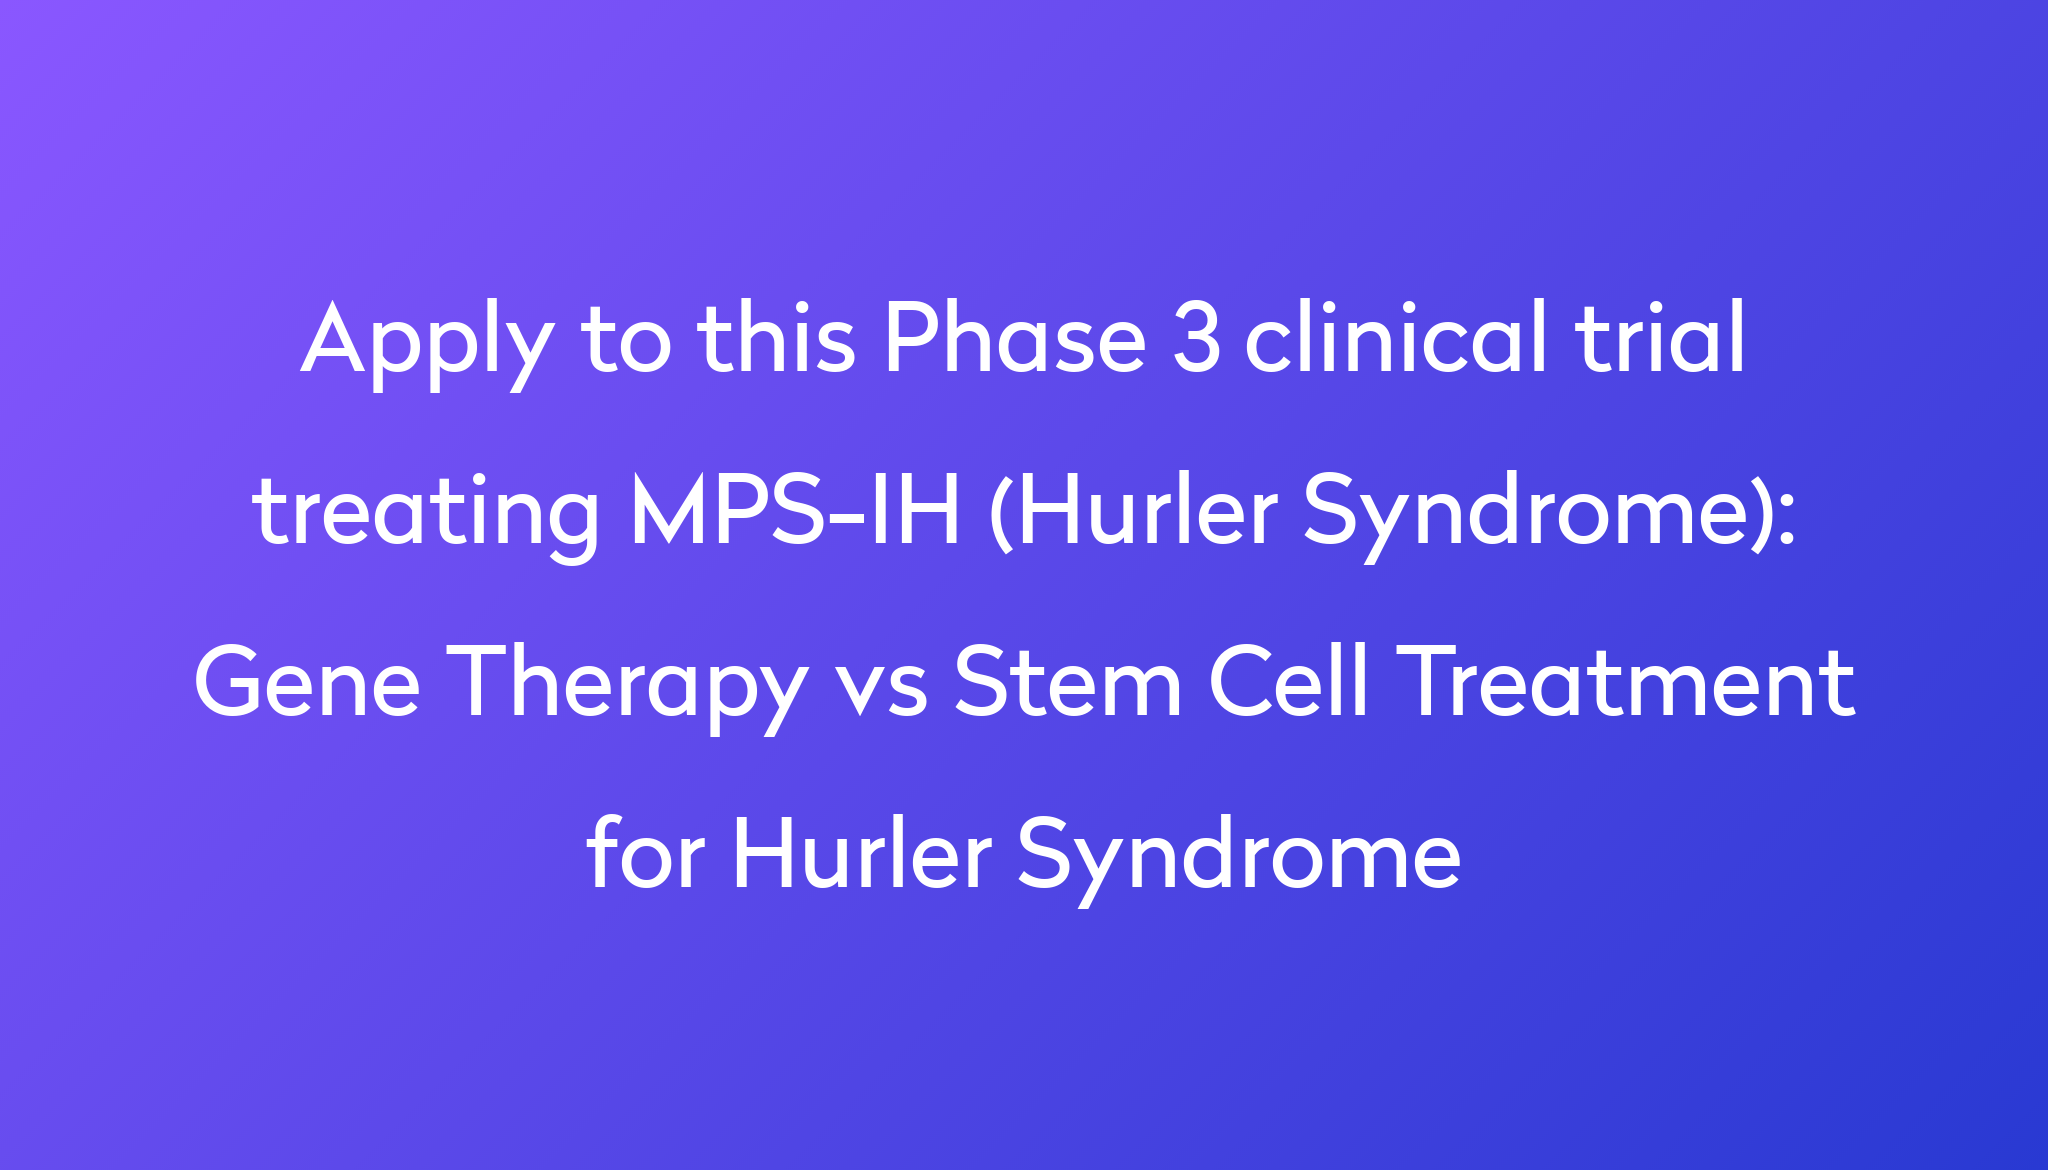 Gene Therapy vs Stem Cell Treatment for Hurler Syndrome Clinical Trial ...